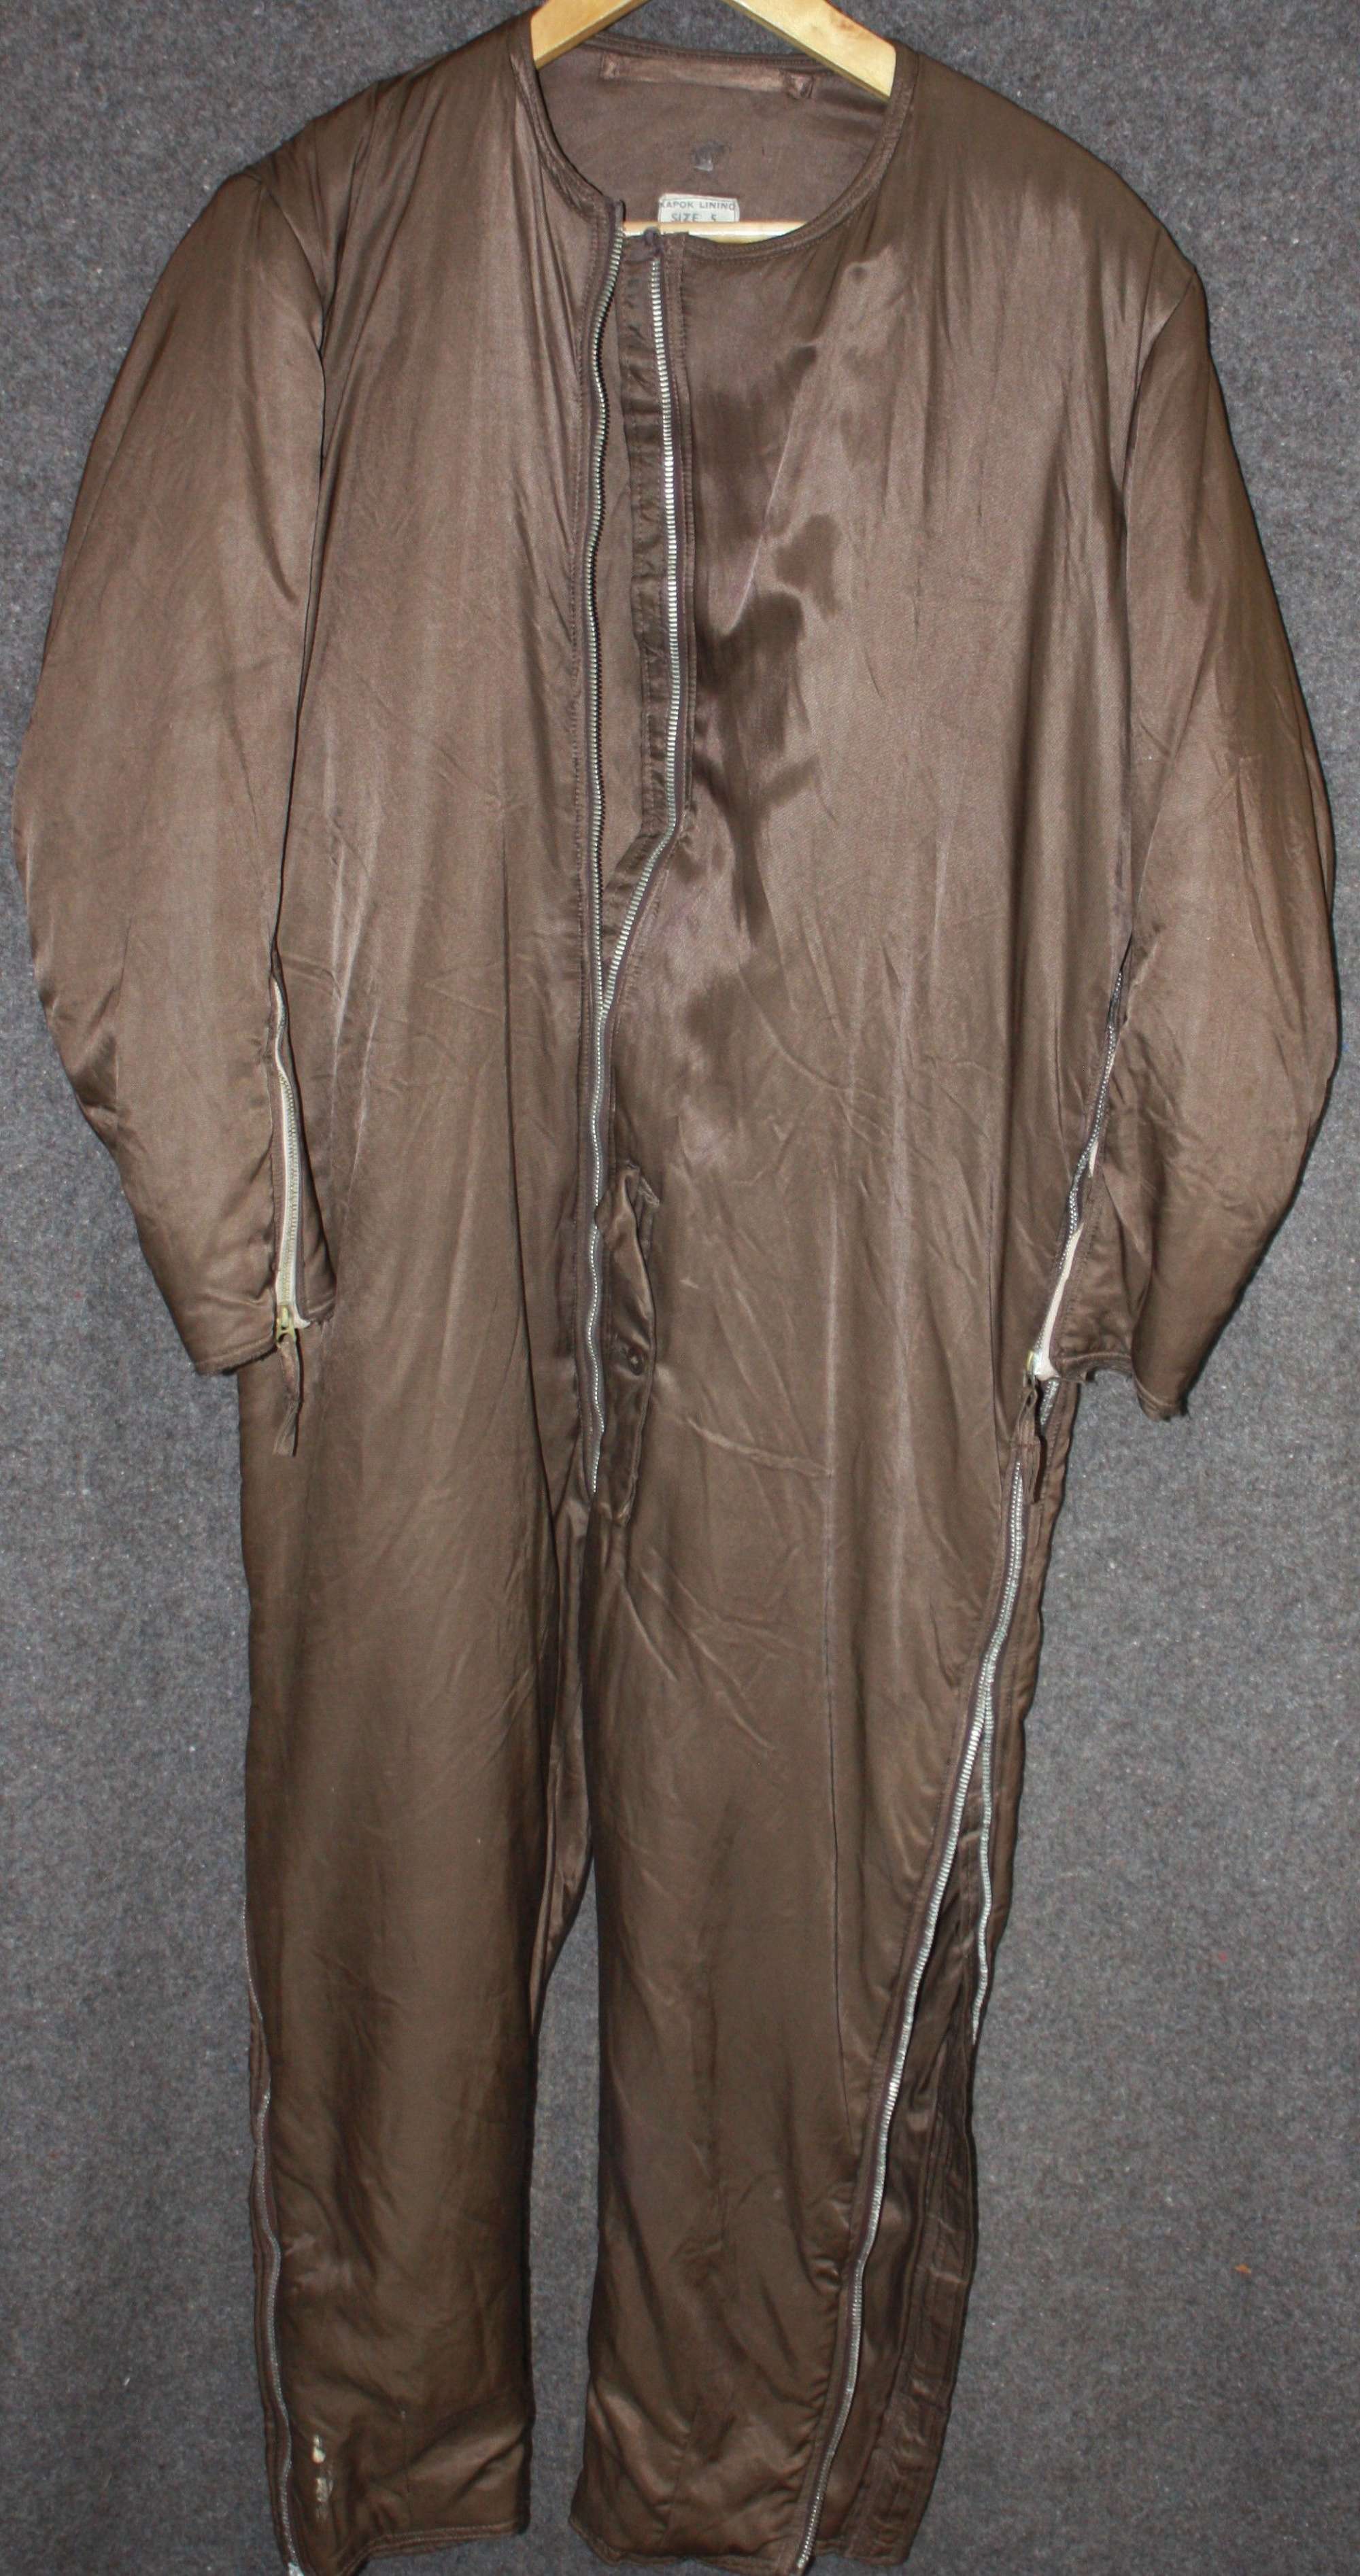 A WWII RAF SIDCOT LINER AM MARKED NO DAMAGE JUST 2 ZIPPERS MISSING